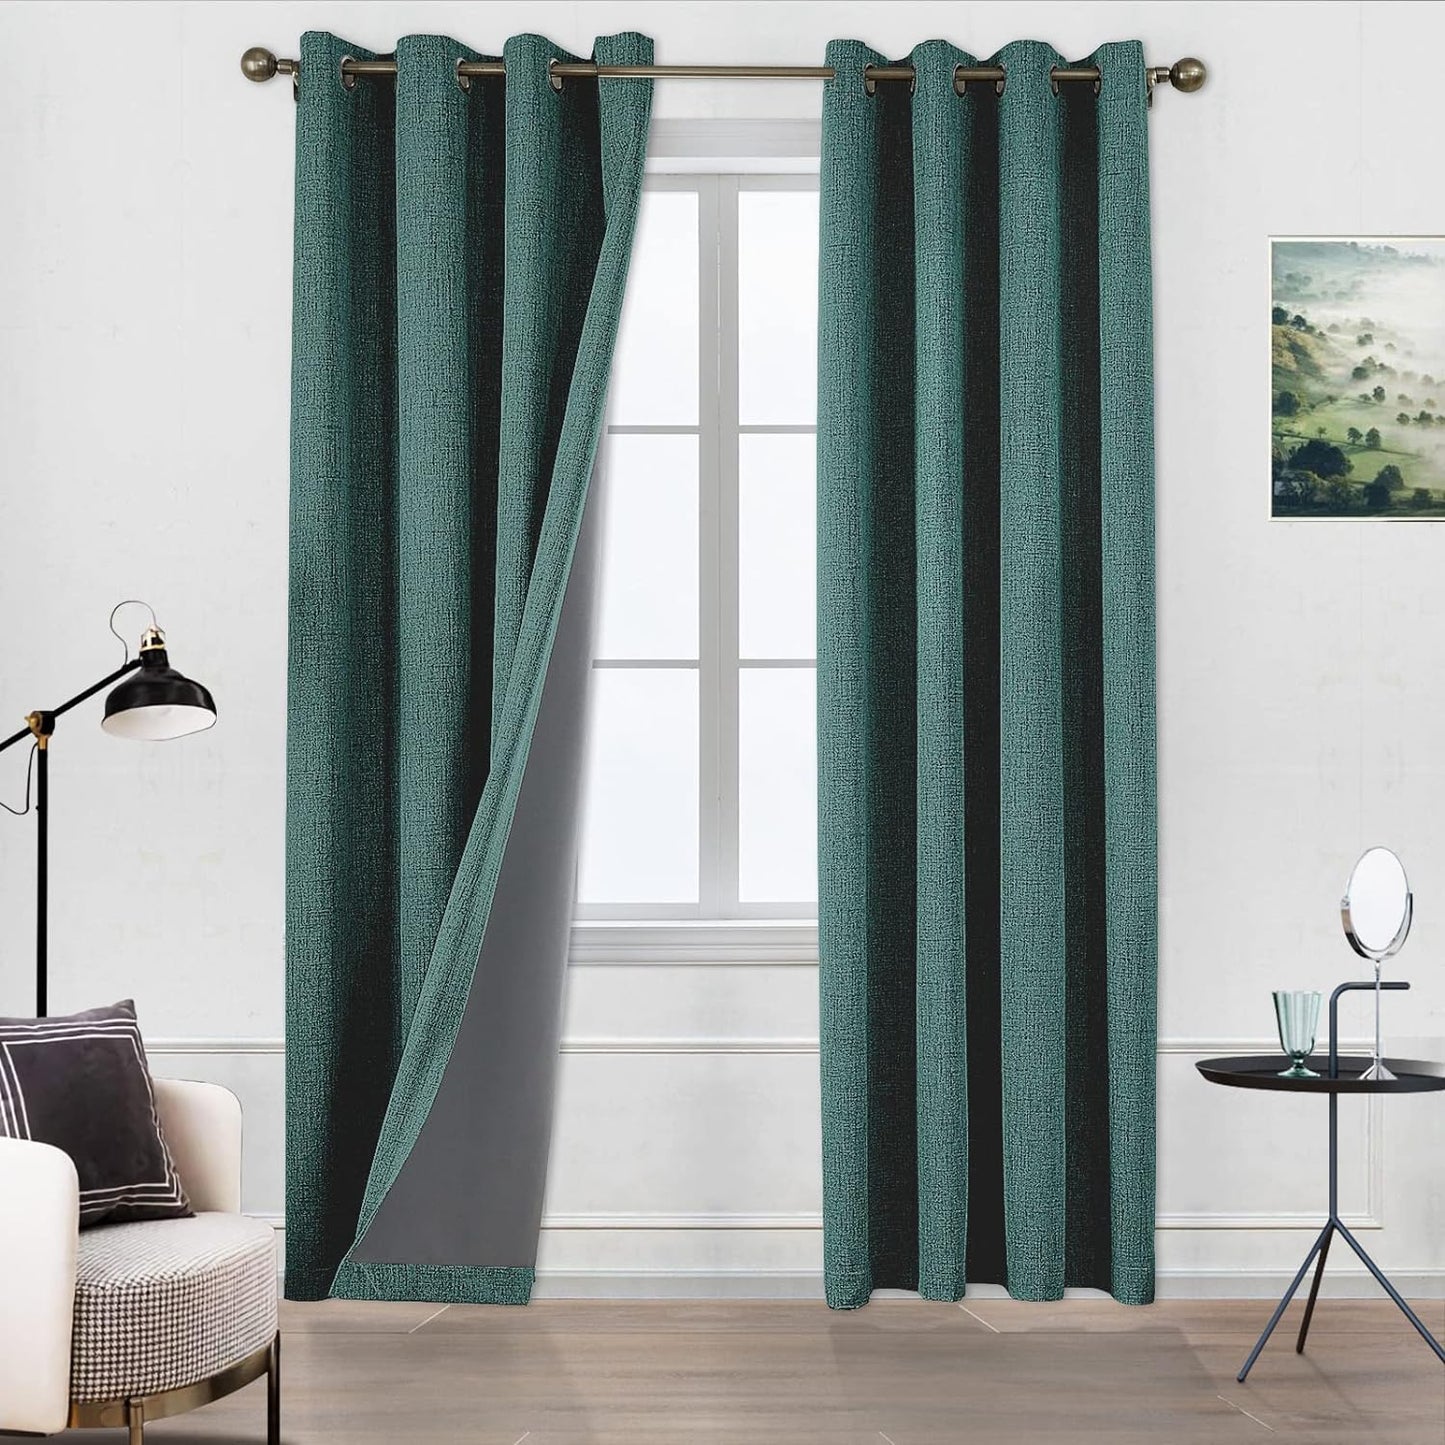 CUCRAF Full Blackout Window Curtains 84 Inches Long,Faux Linen Look Thermal Insulated Grommet Drapes Panels for Bedroom Living Room,Set of 2(52 X 84 Inches, Light Khaki)  CUCRAF Hunter Green 52 X 95 Inches 